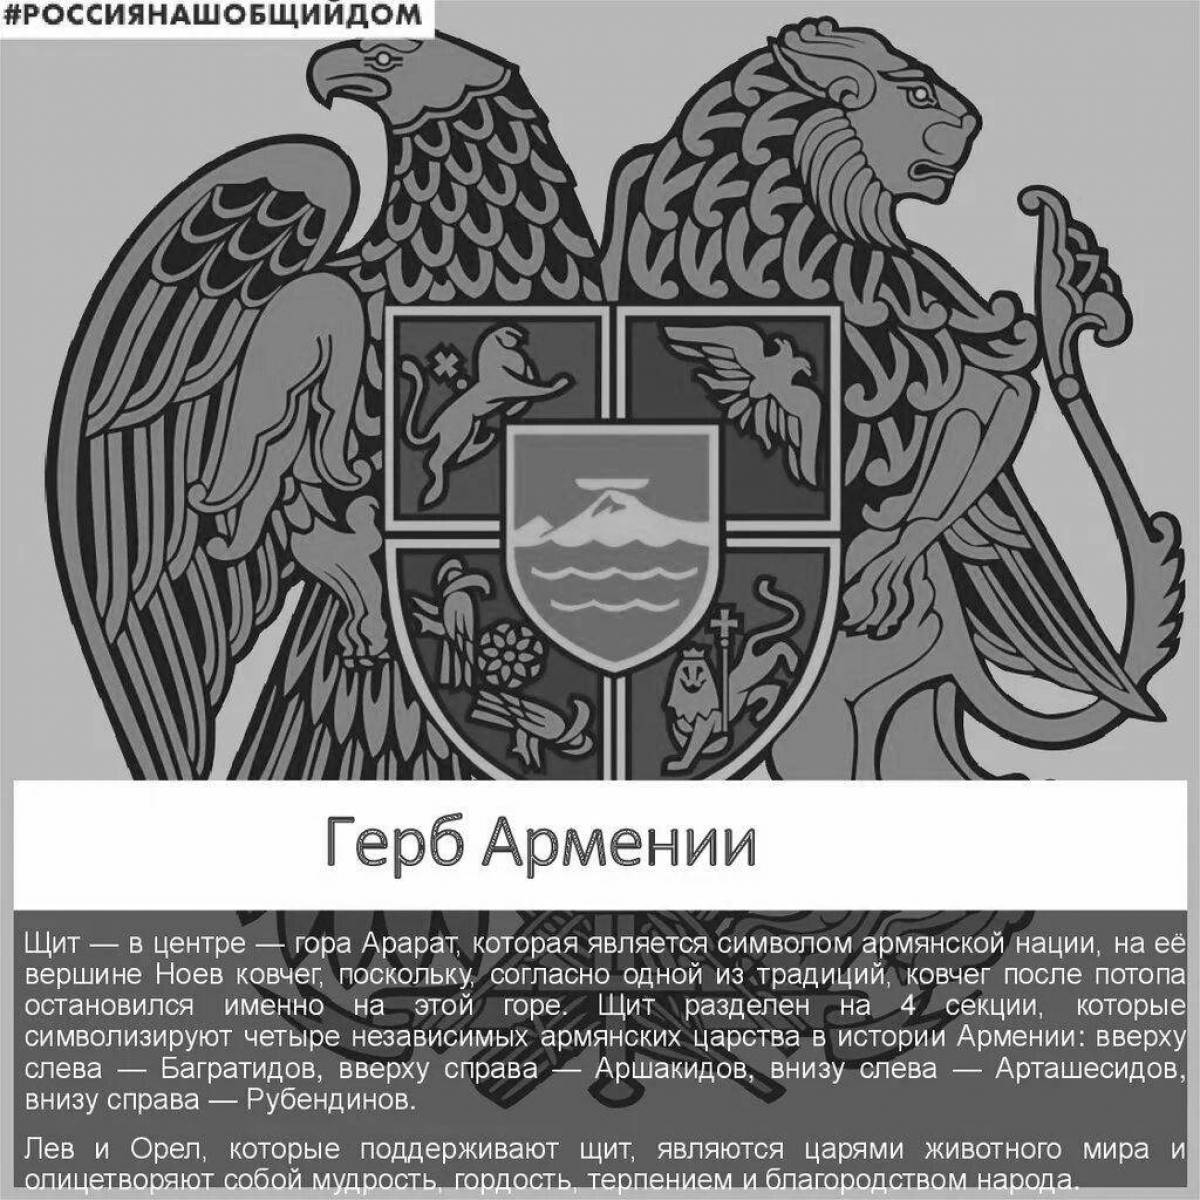 Coloring page radiant coat of arms of armenia